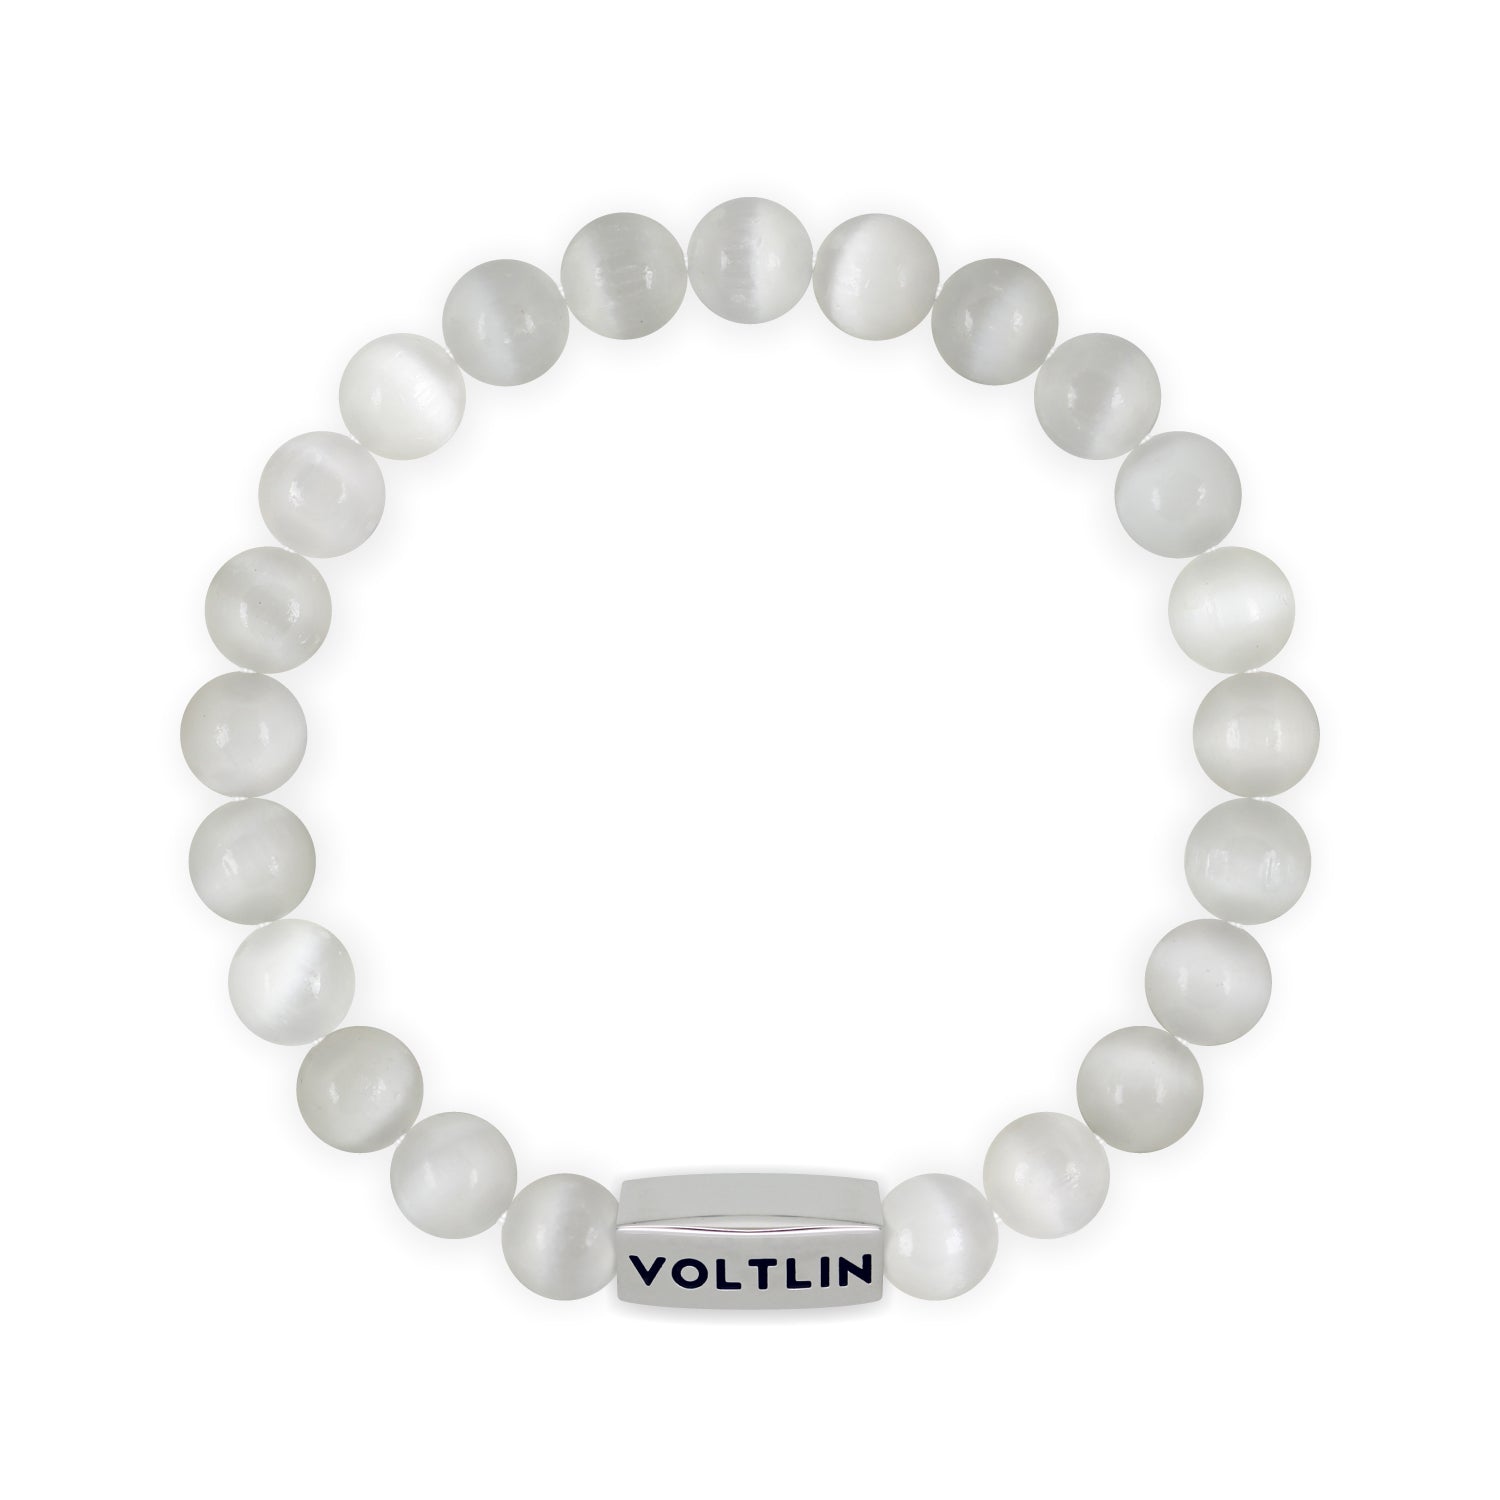 Front view of an 8mm Selenite beaded stretch bracelet with silver stainless steel logo bead made by Voltlin